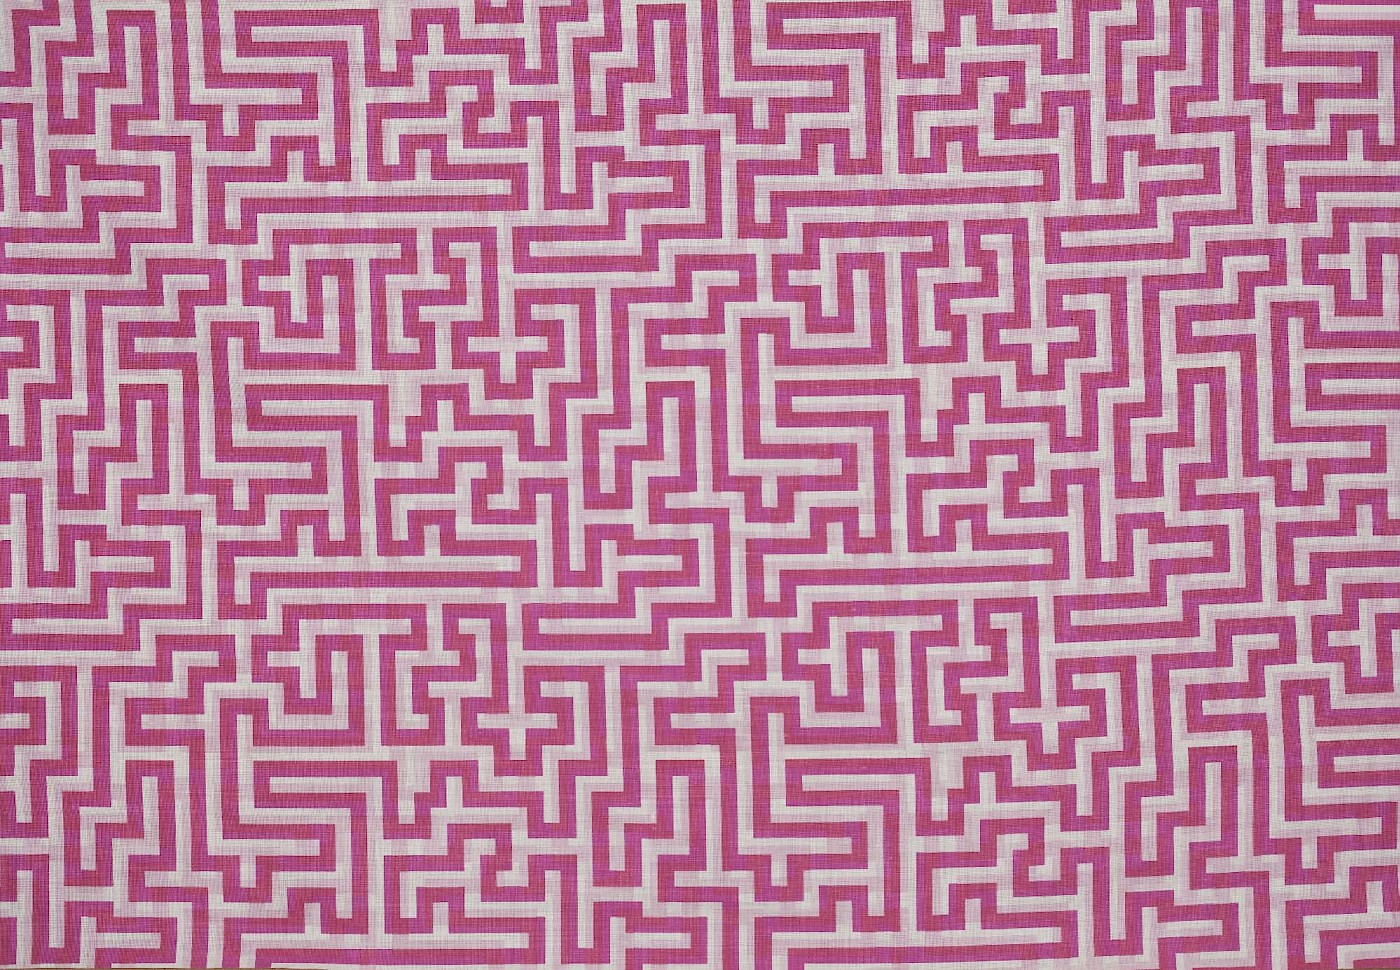 Anni Albers Meander: Hot Pink